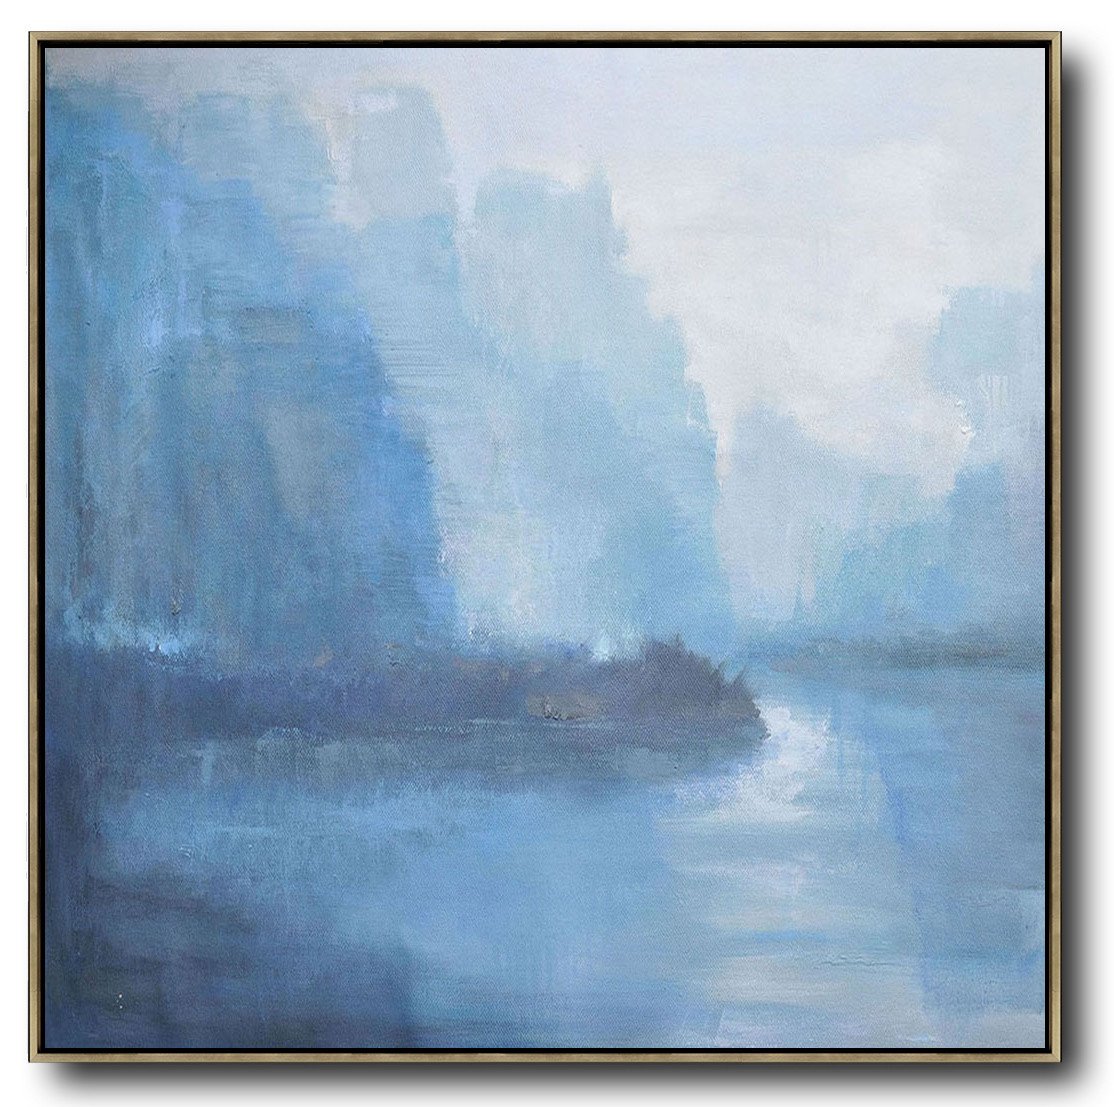 Hand-painted oversized Abstract Landscape Oil Painting by Jackson paint online